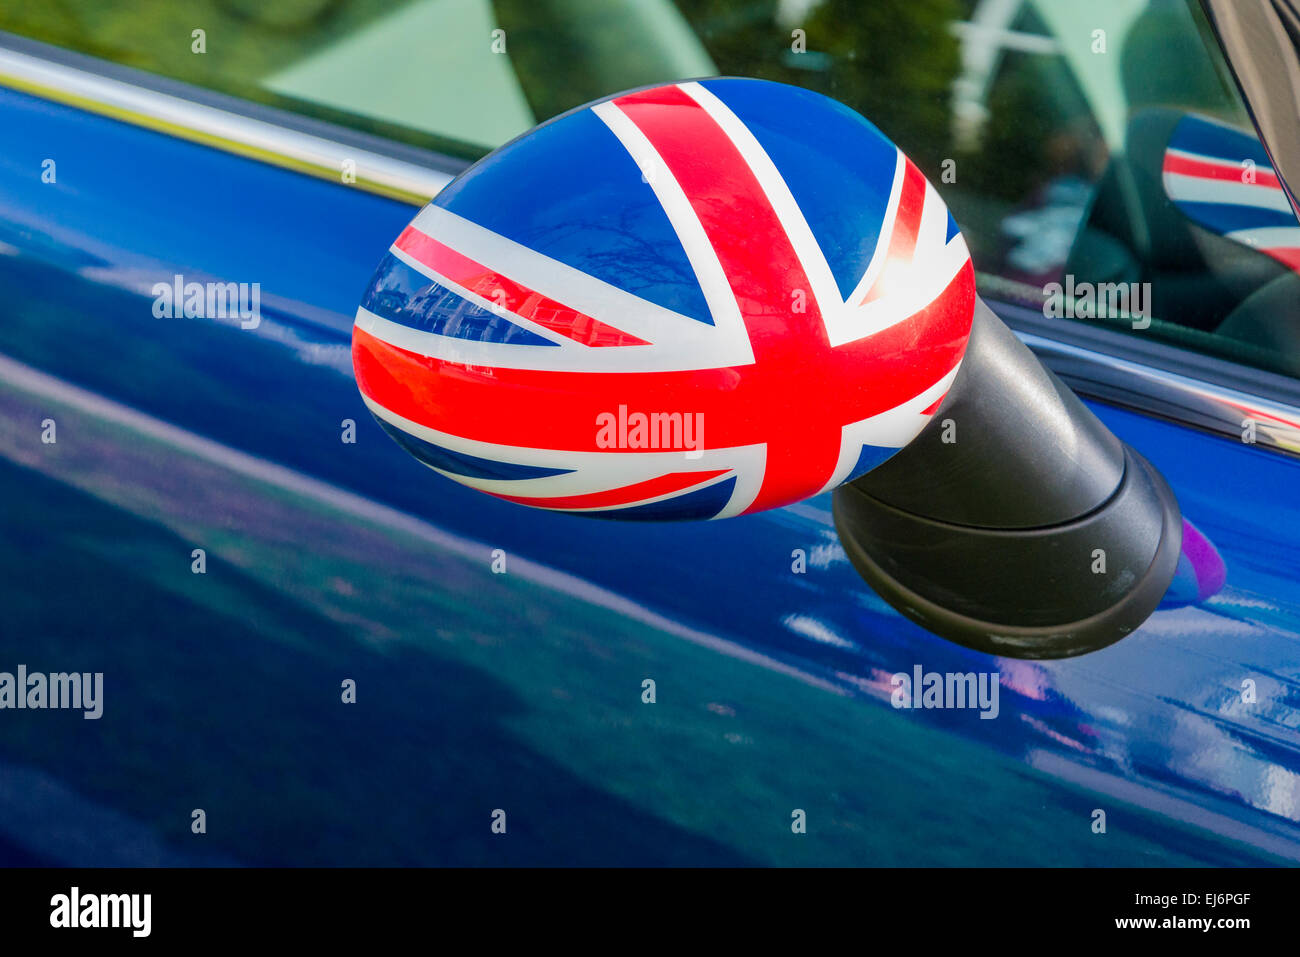 Union jack painted on car rear view mirror Stock Photo